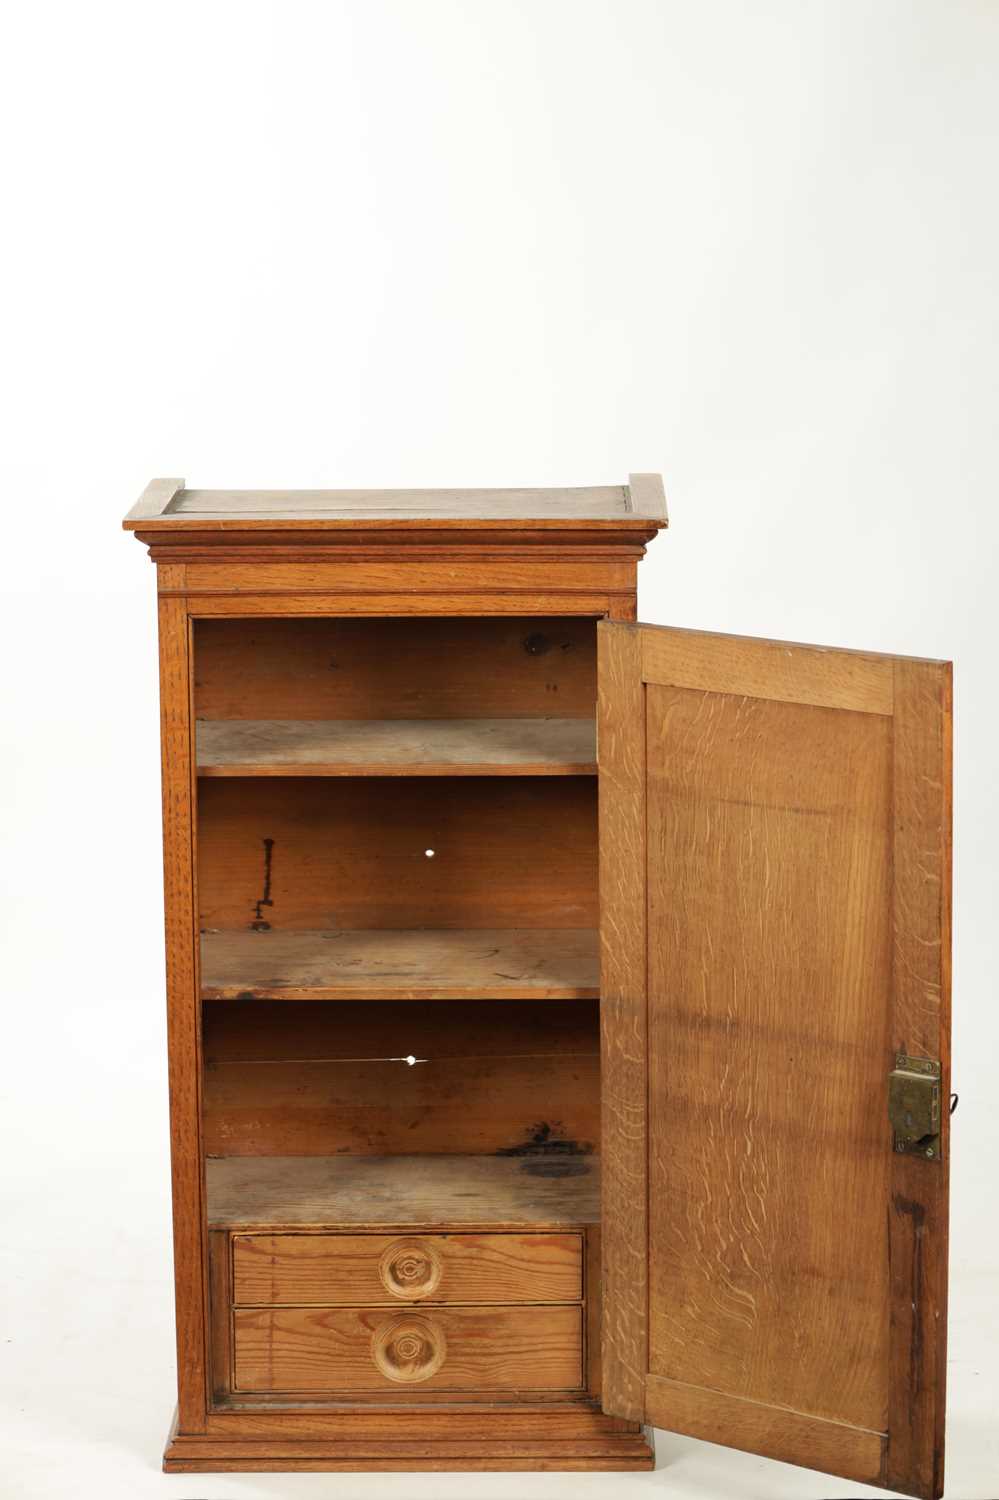 AN EARLY 19TH CENTURY OAK TABLE CABINET - Image 5 of 14